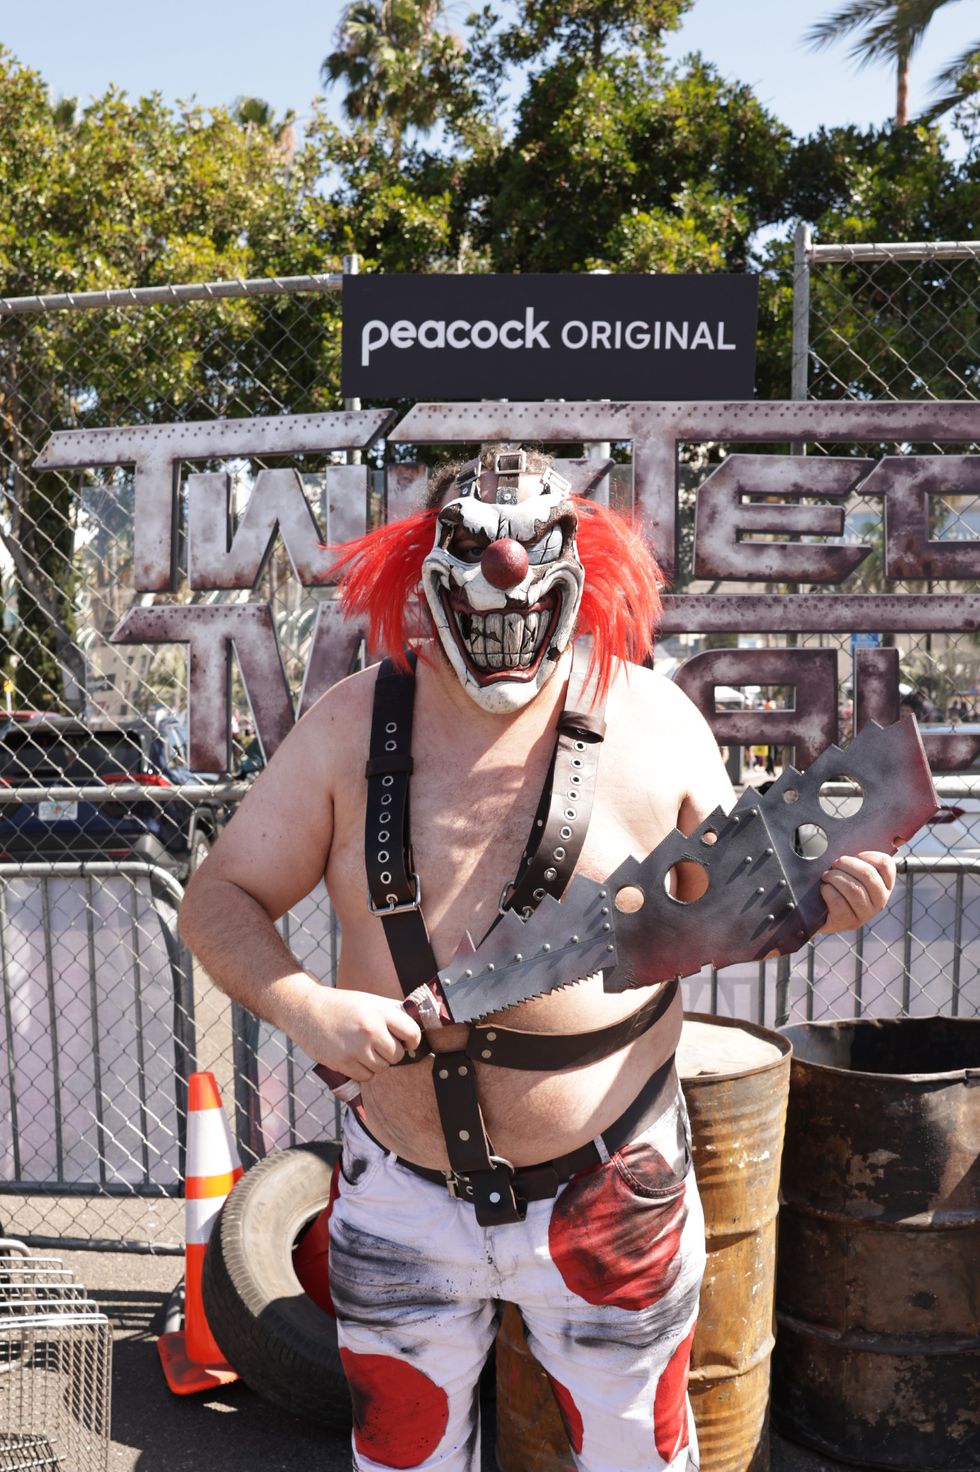 https://hips.hearstapps.com/hmg-prod/images/peacocks-twisted-metal-at-comic-con-pictured-sweet-tooth-news-photo-1692366997.jpg?crop=0.747xw:0.748xh;0.145xw,0.210xh&resize=980:*